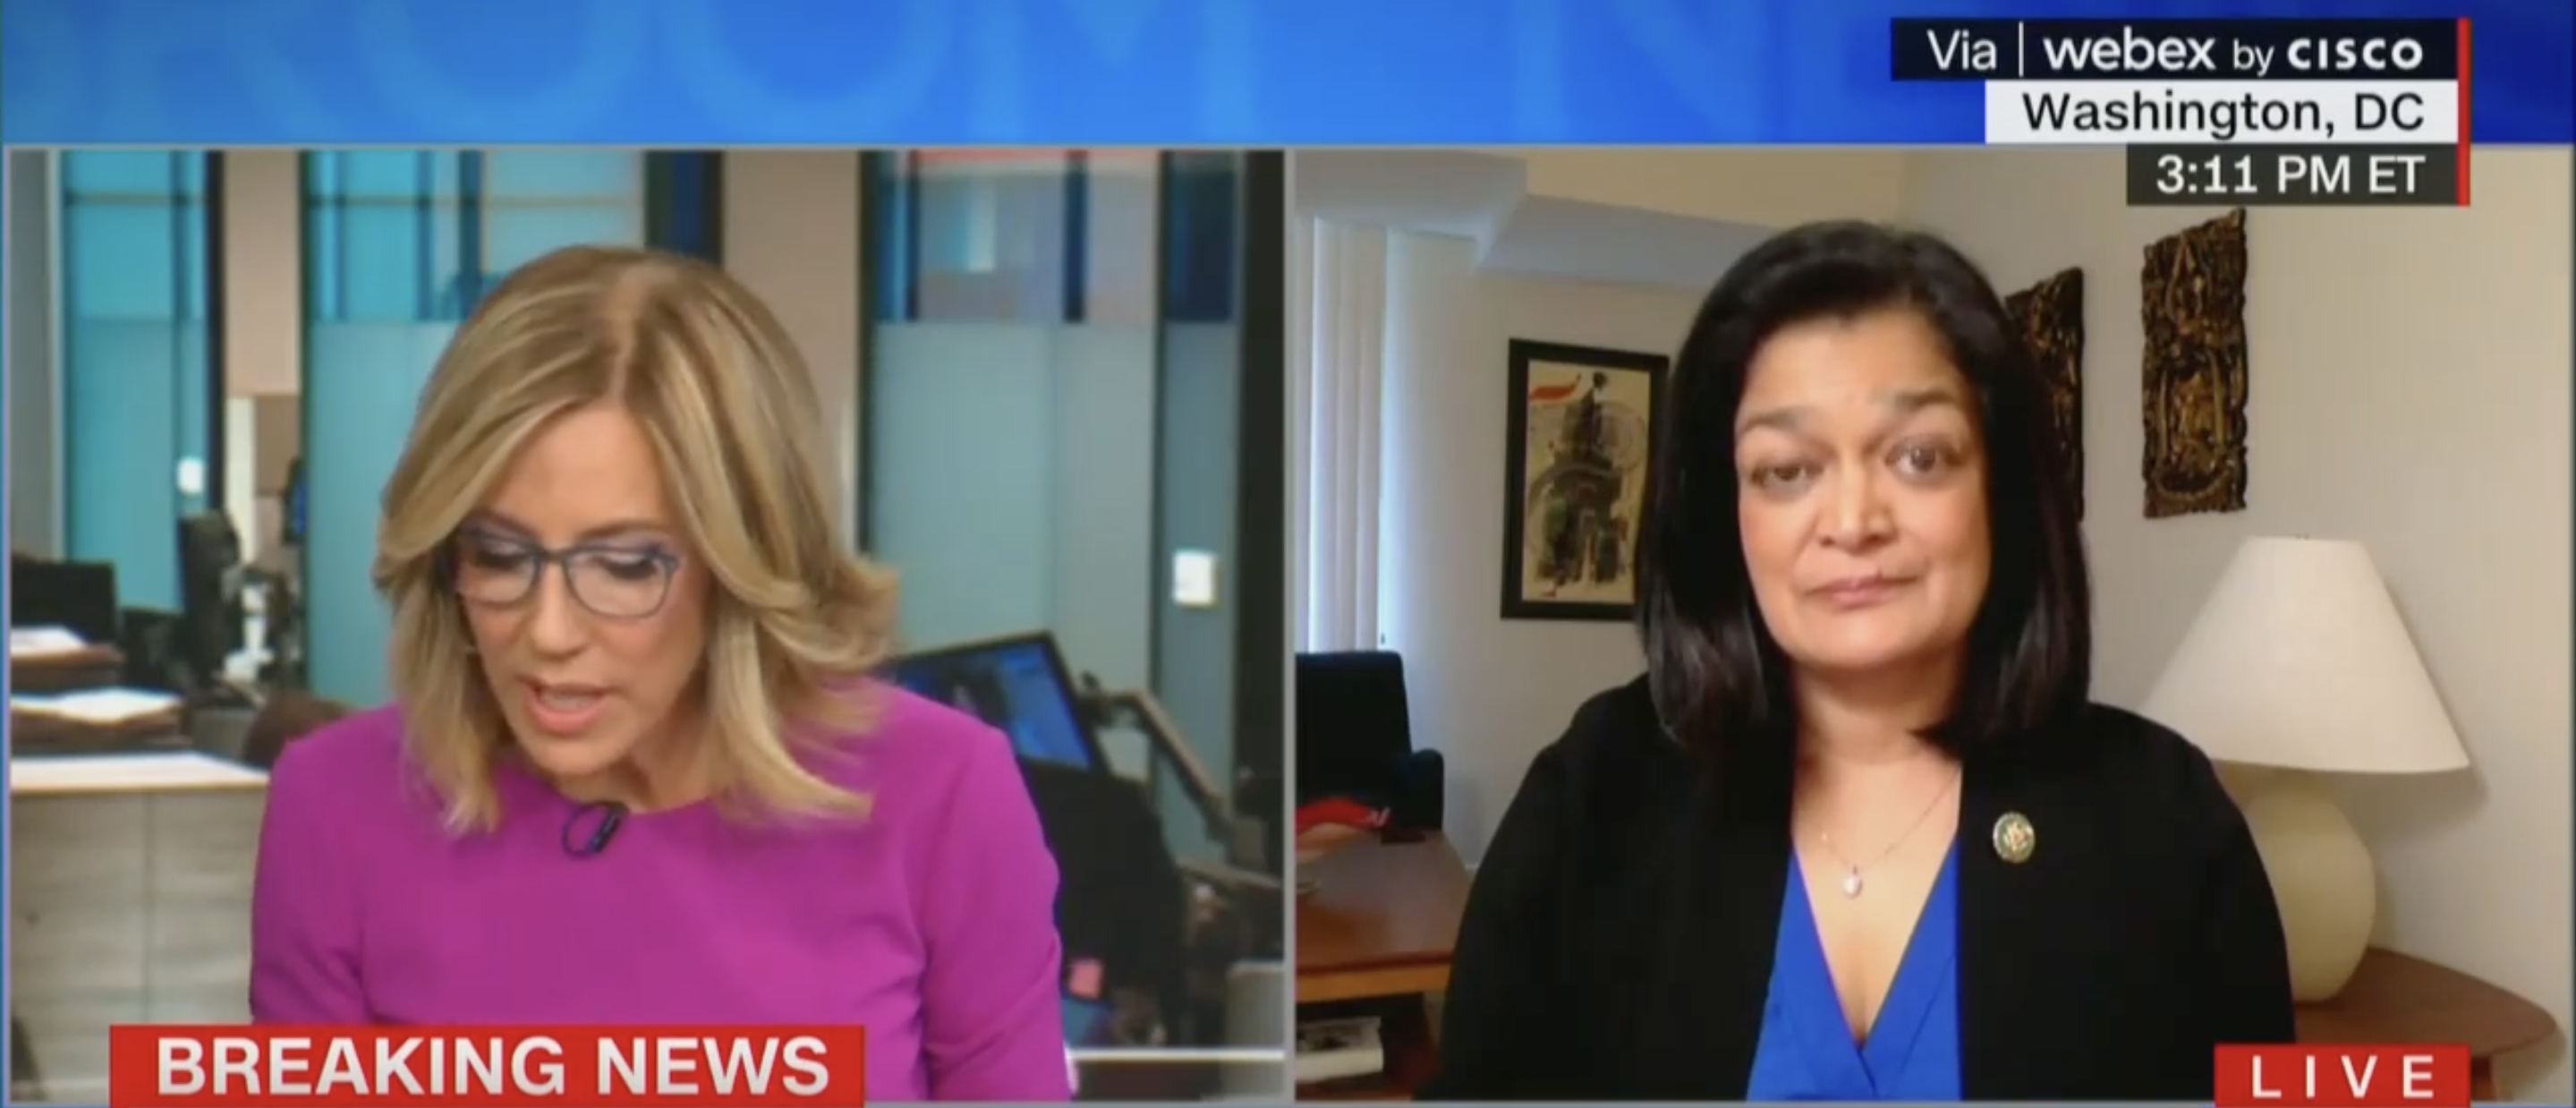 CNN Host Confronts Rep. Jayapal With Old Tweet As DOJ Announces Special Counsel To Investigate Biden